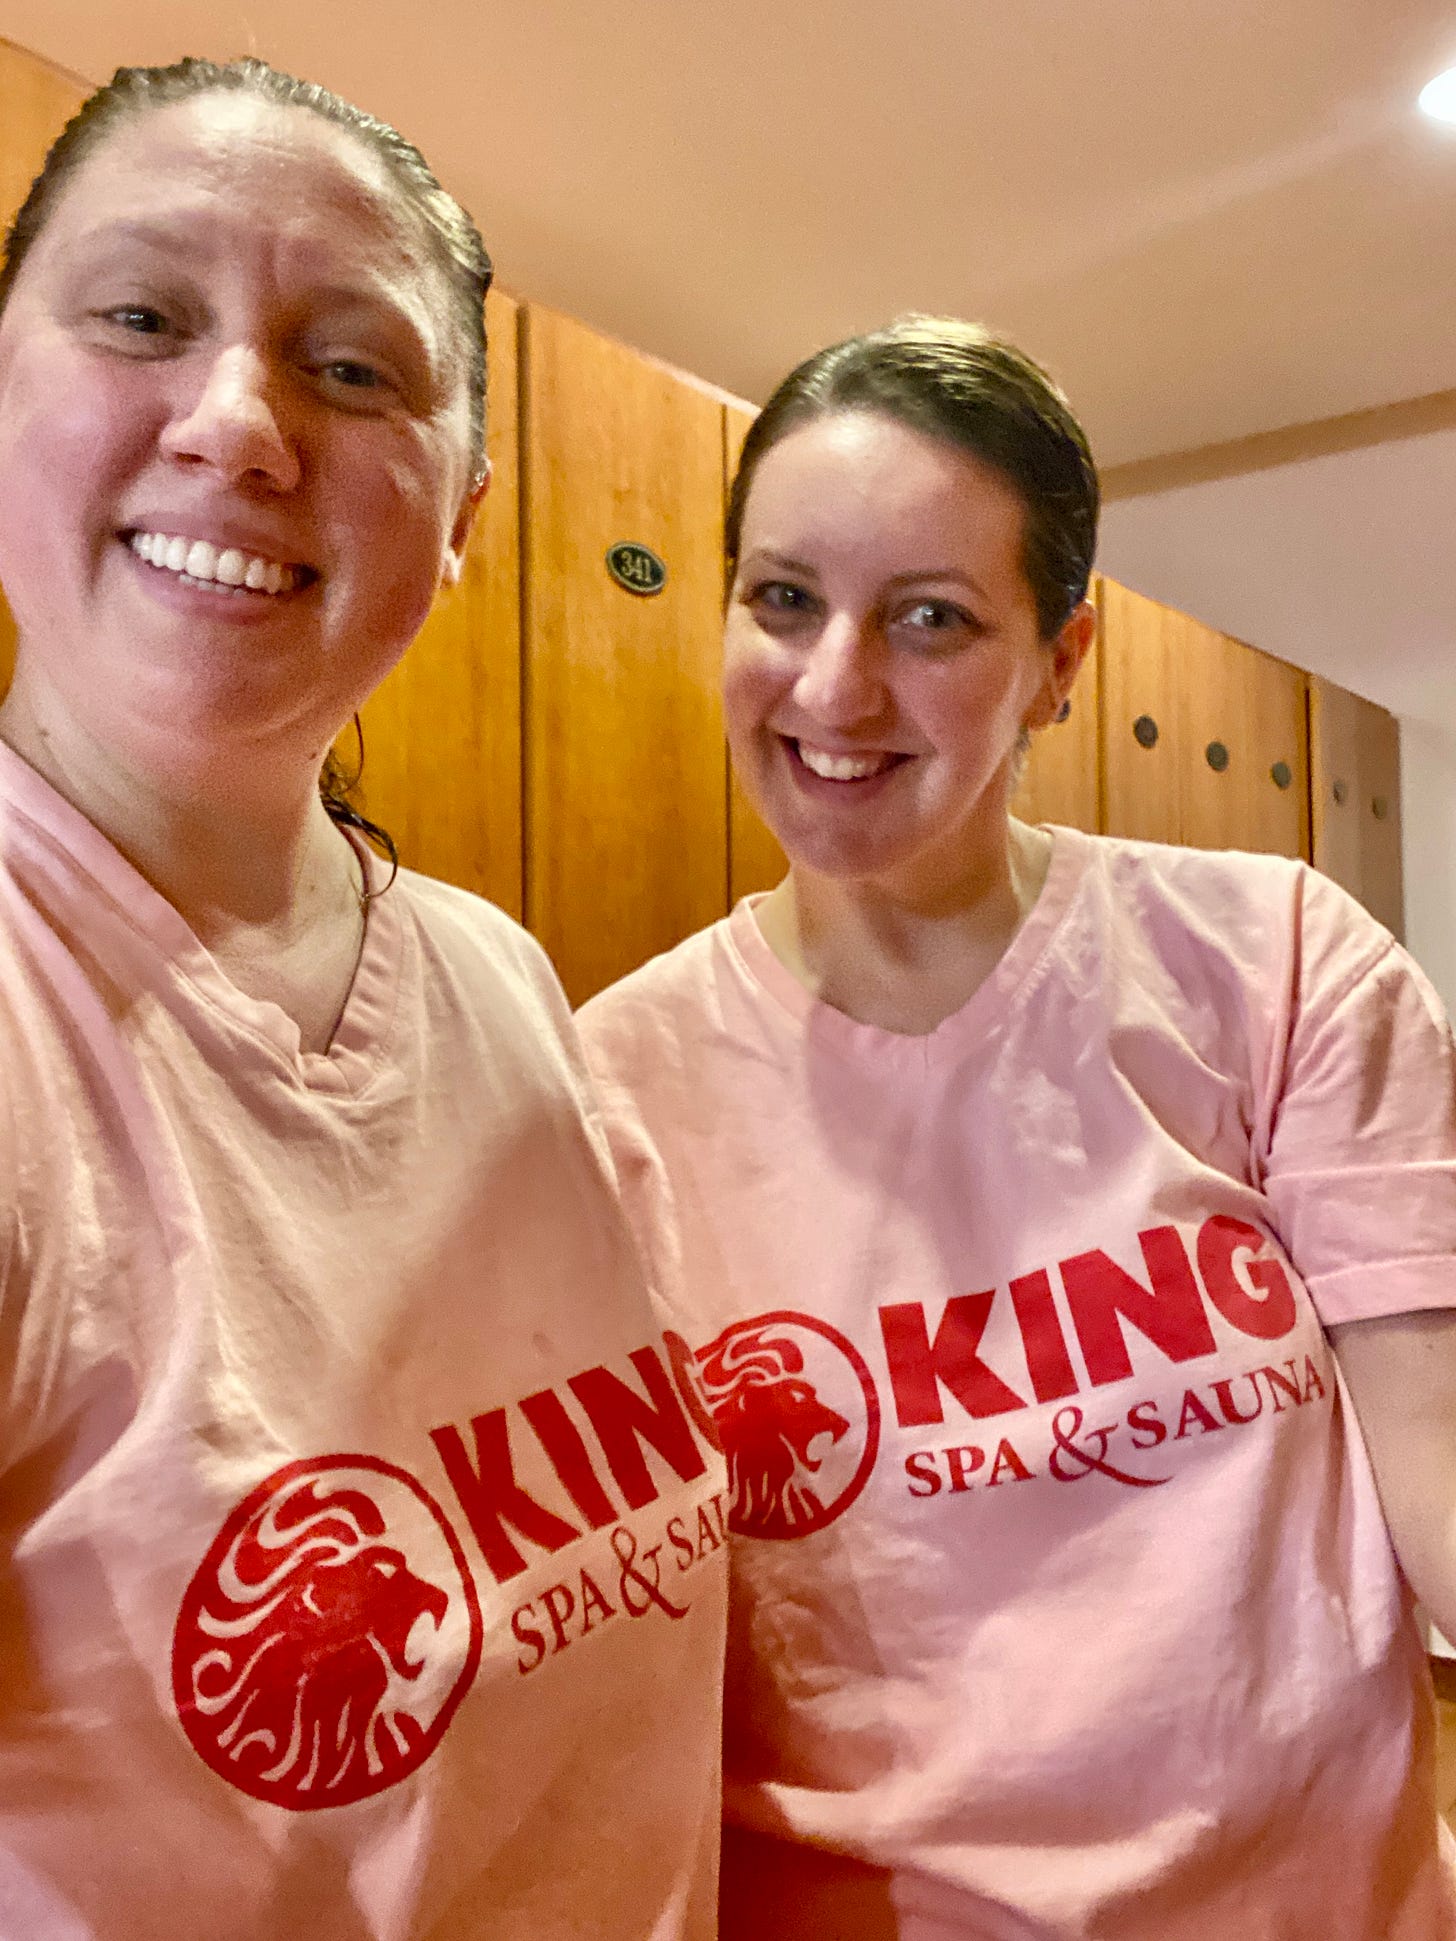 A selfie of two middle-aged whtie women in a locker room (me and a friend). We are wearing pink, v-neck t-shirts that say King Spa & Sauna on the front in red, with the image of a lion's head also in red. We are smiling and our hair is wet and pulled back